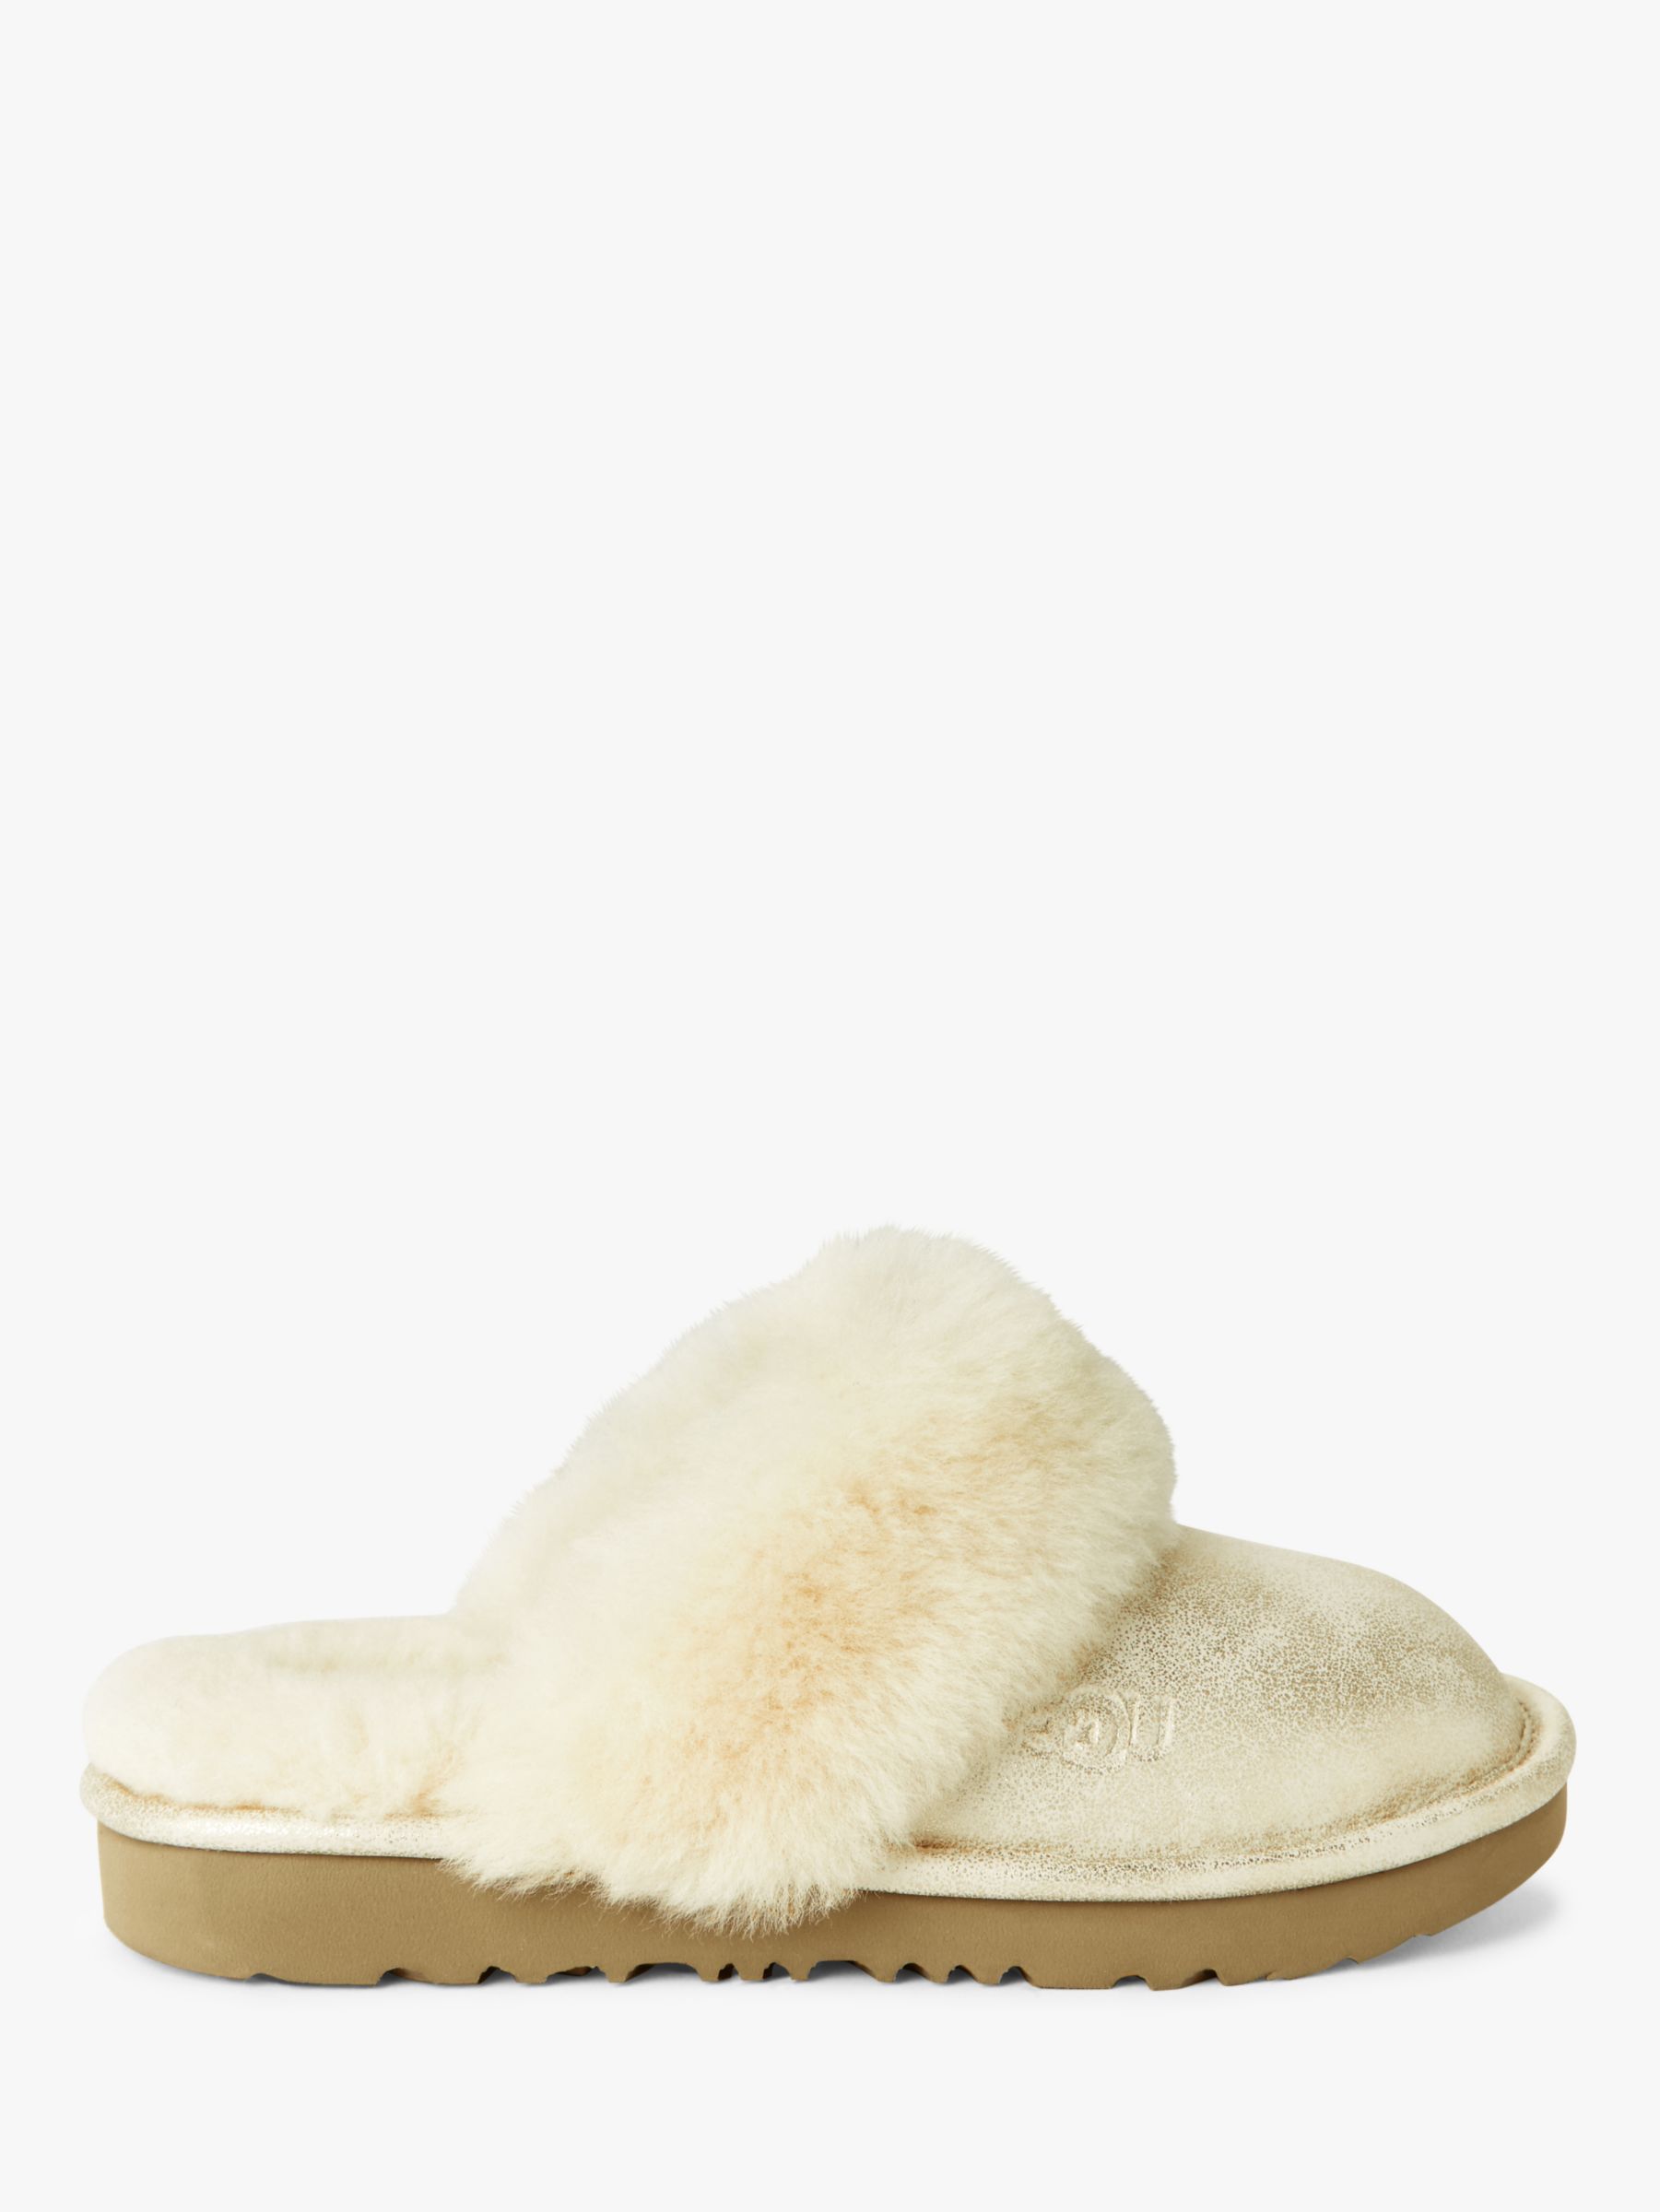 ugg slippers gold